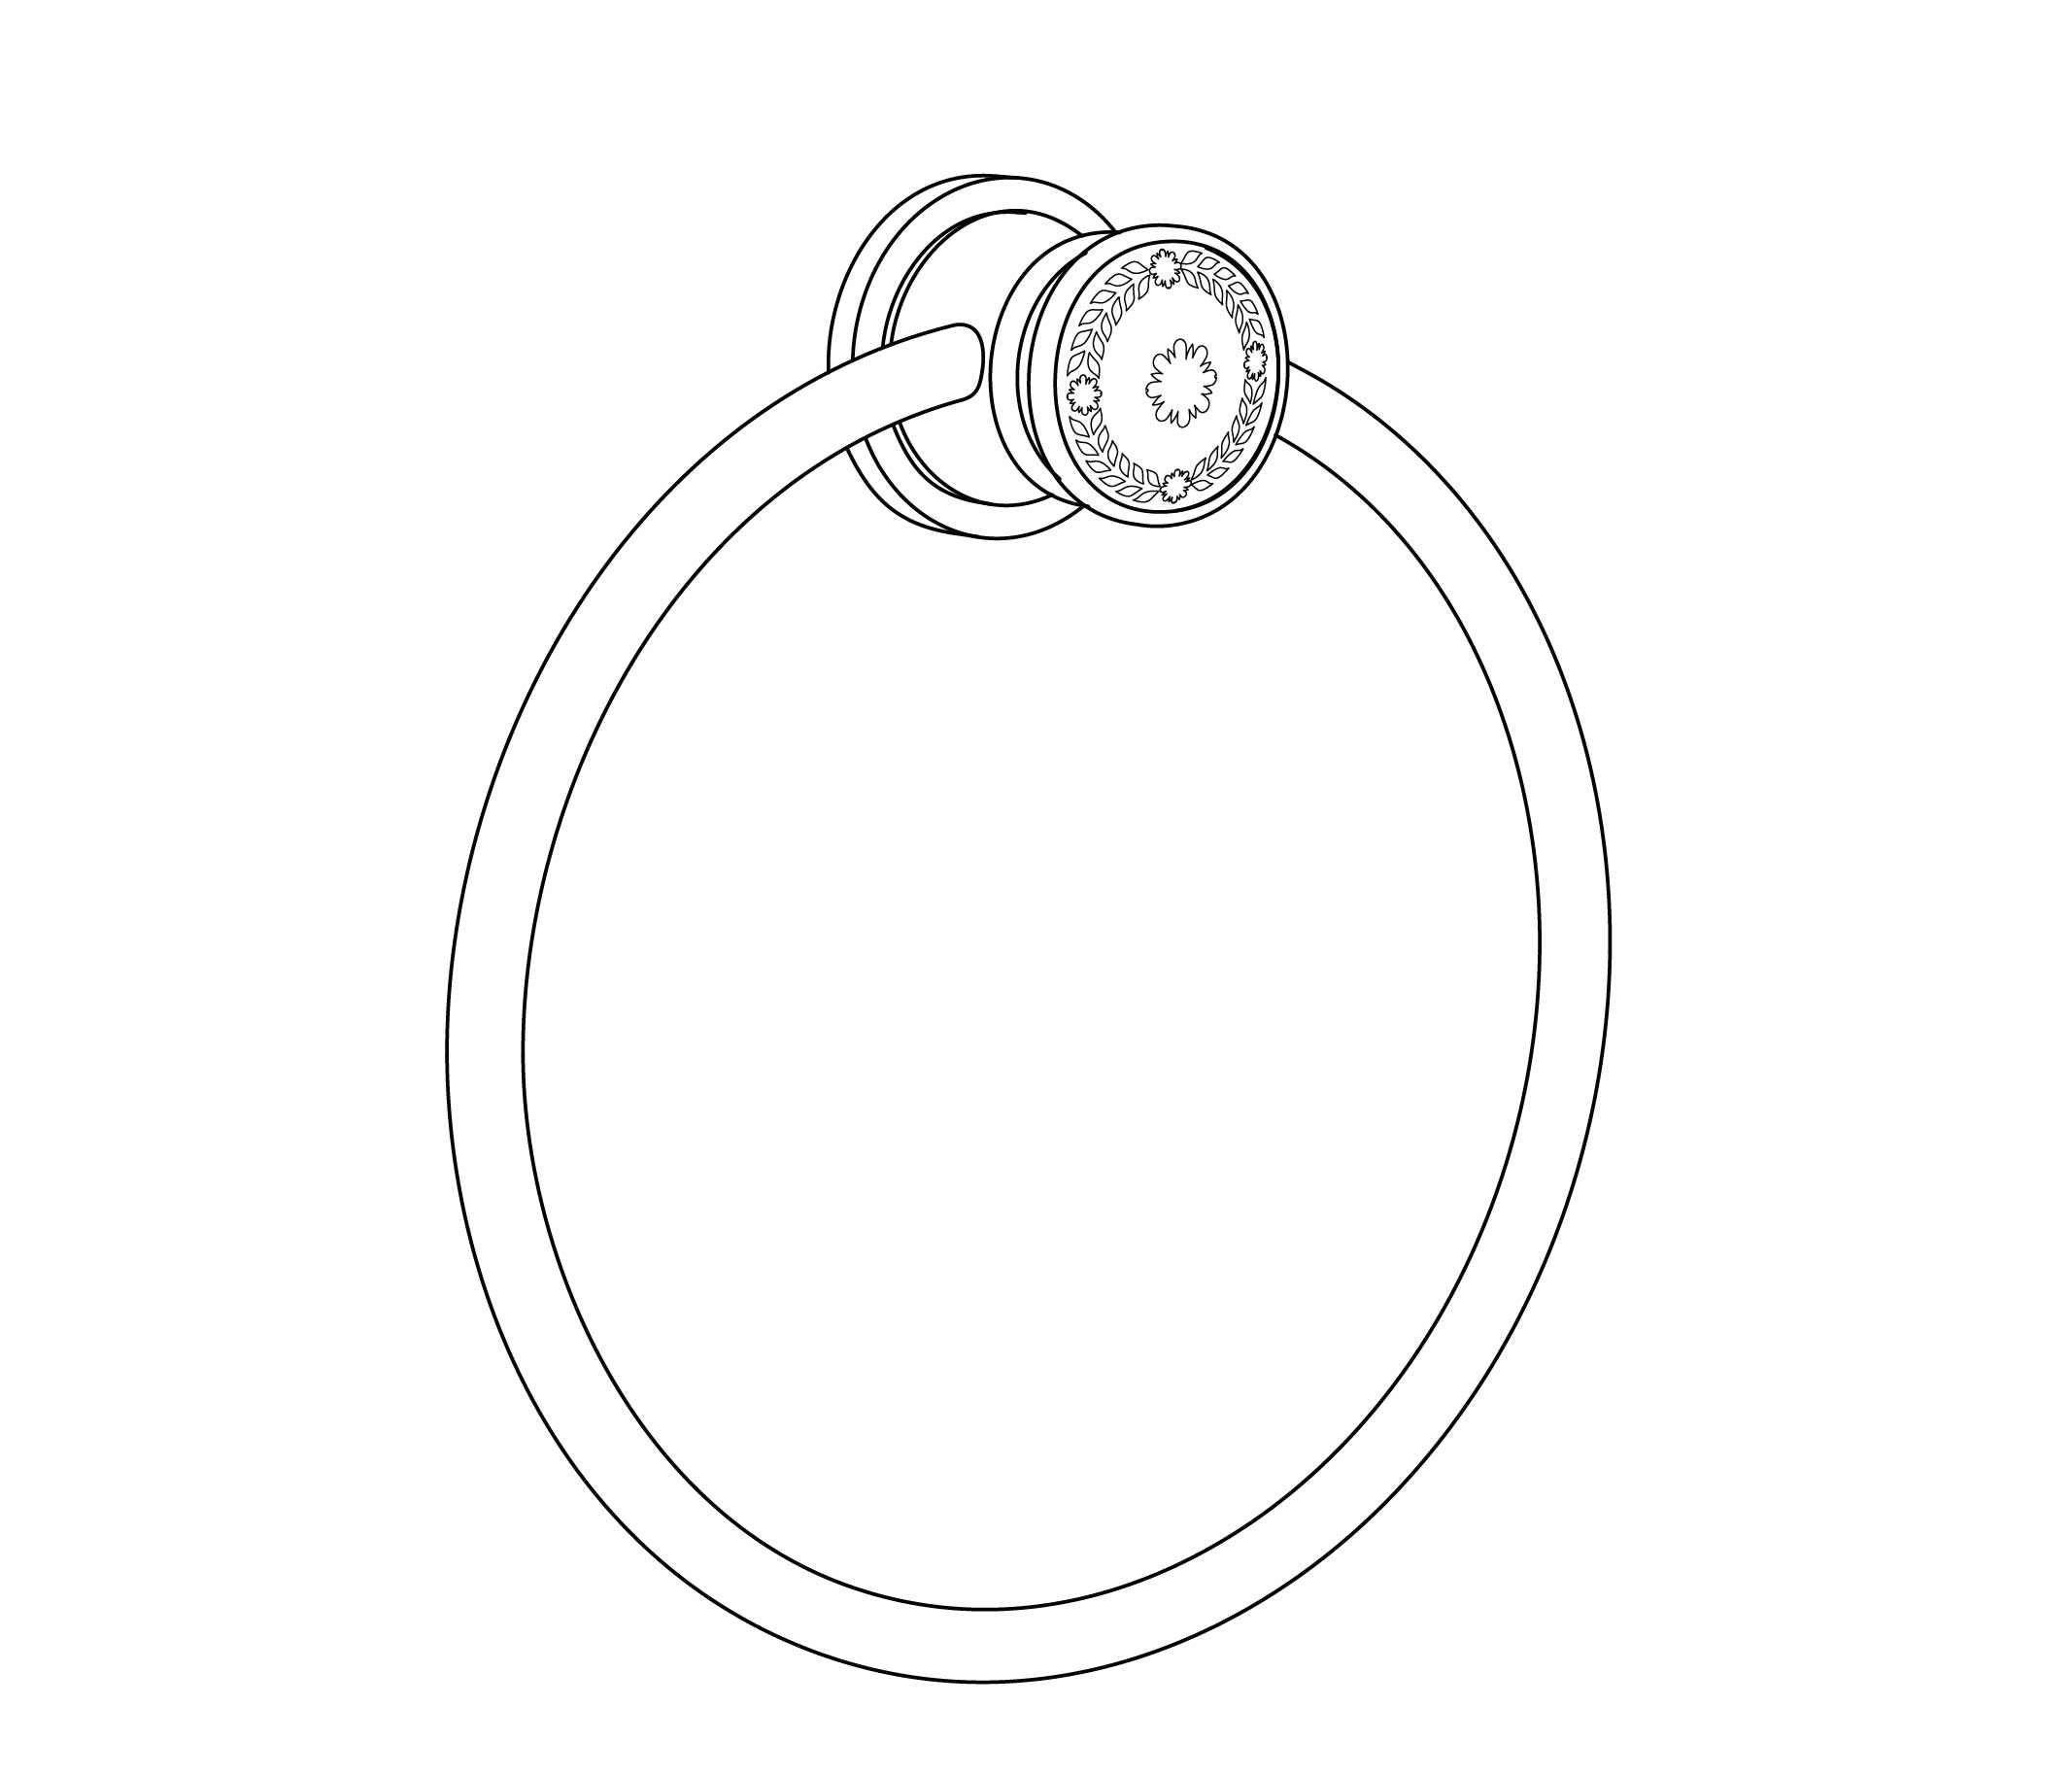 S196-510 Wall mounted towel ring